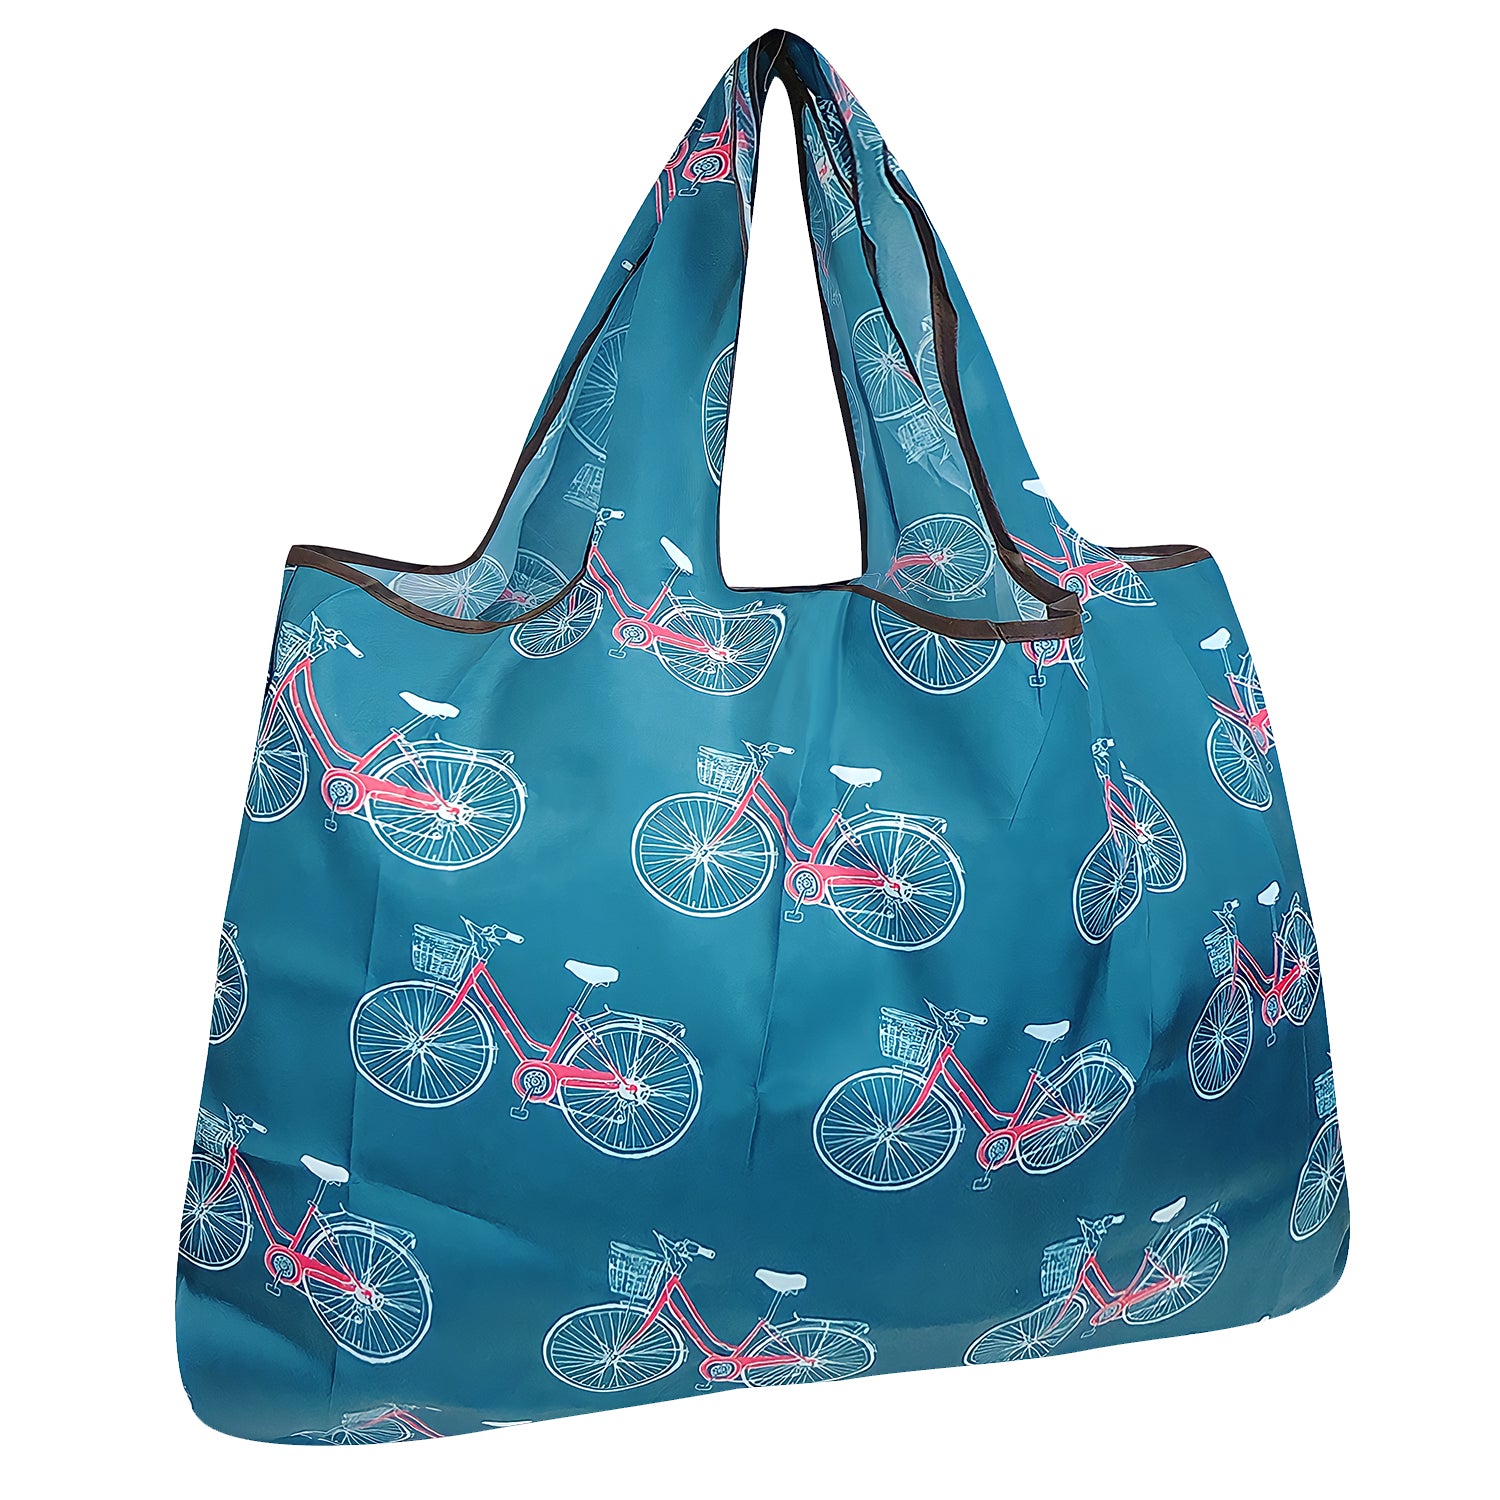 Go Green With Reusable Shopping Tote Bags